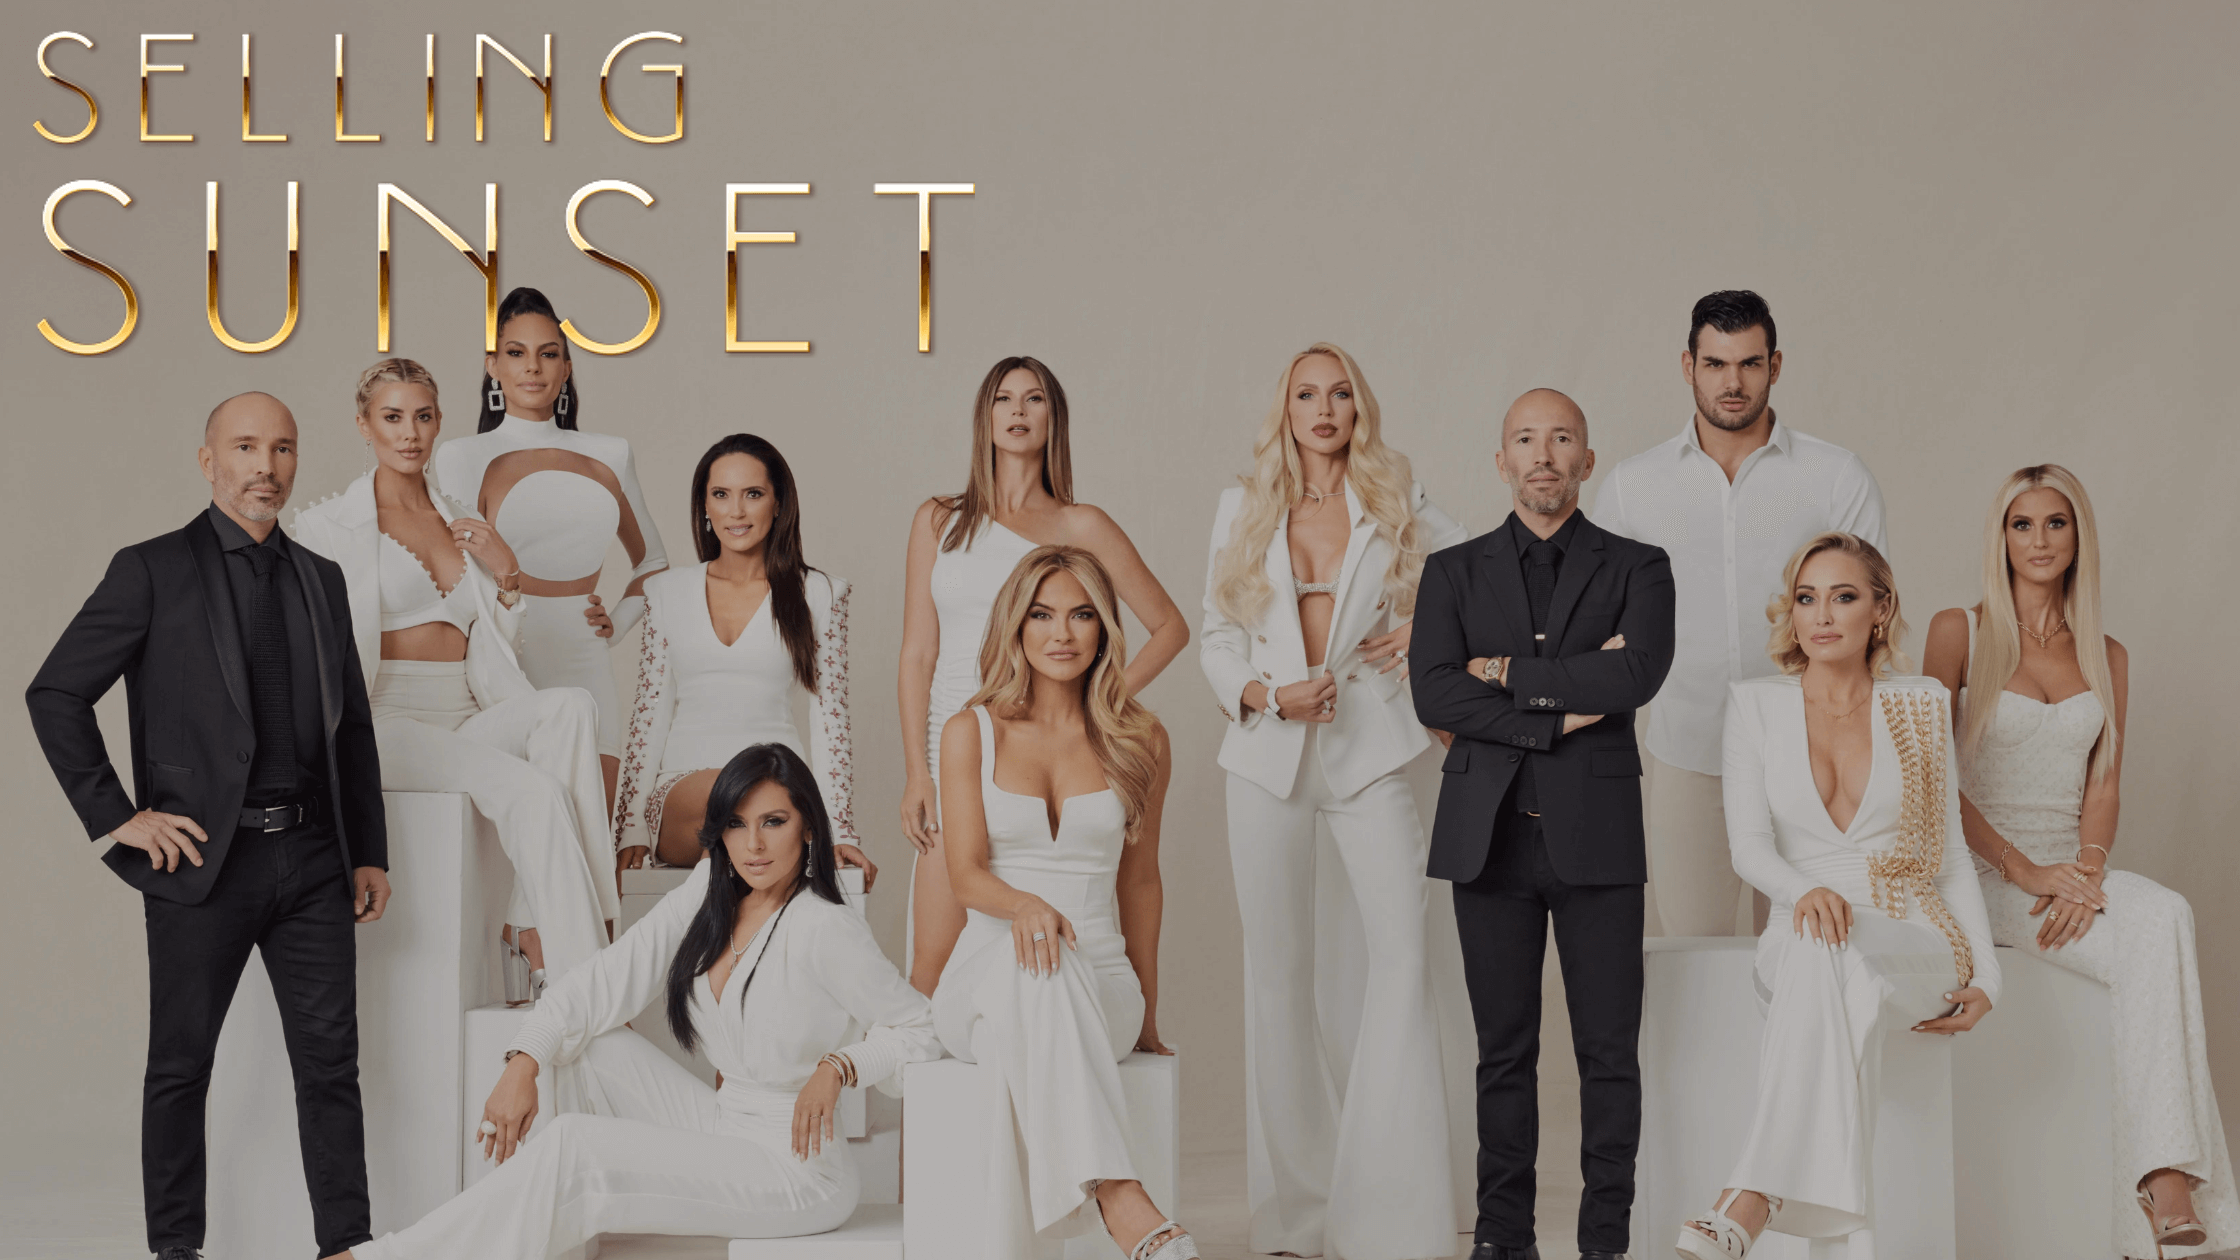 This image features a promotional group photo for the TV show "Selling Sunset". There are eleven individuals, presumably real estate agents, stylishly dressed in coordinated white and black attire, posing against a neutral beige background. The title "SELLING SUNSET" is displayed prominently at the top in large, elegant golden letters that stand out against the background. The individuals are arranged in a pyramid formation with some seated and others standing, giving a sense of hierarchy and team dynamics. The lighting is soft and professional, highlighting the polished aesthetics of the individuals and their fashionable outfits, which range from suits to elegant dresses, indicating the show's focus on luxury and glamour.